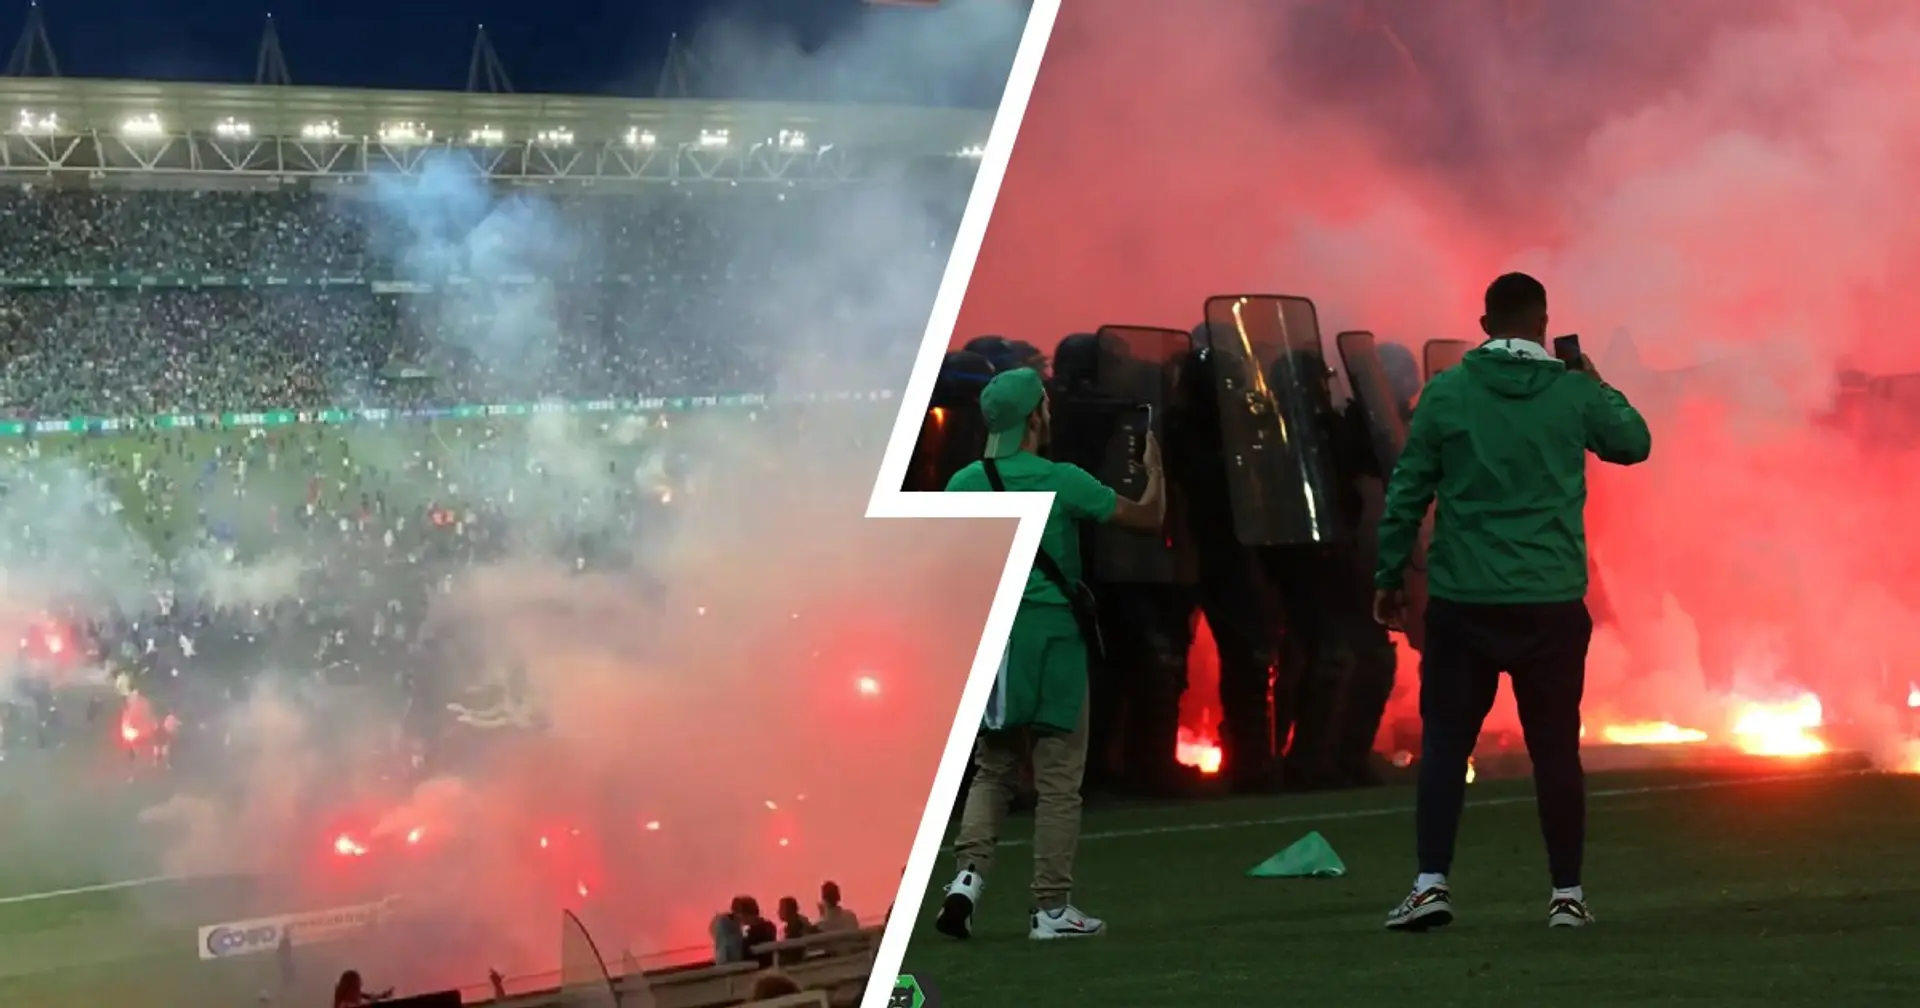 Saint-Etienne fans attack their own players with flares and explosives after being relegated